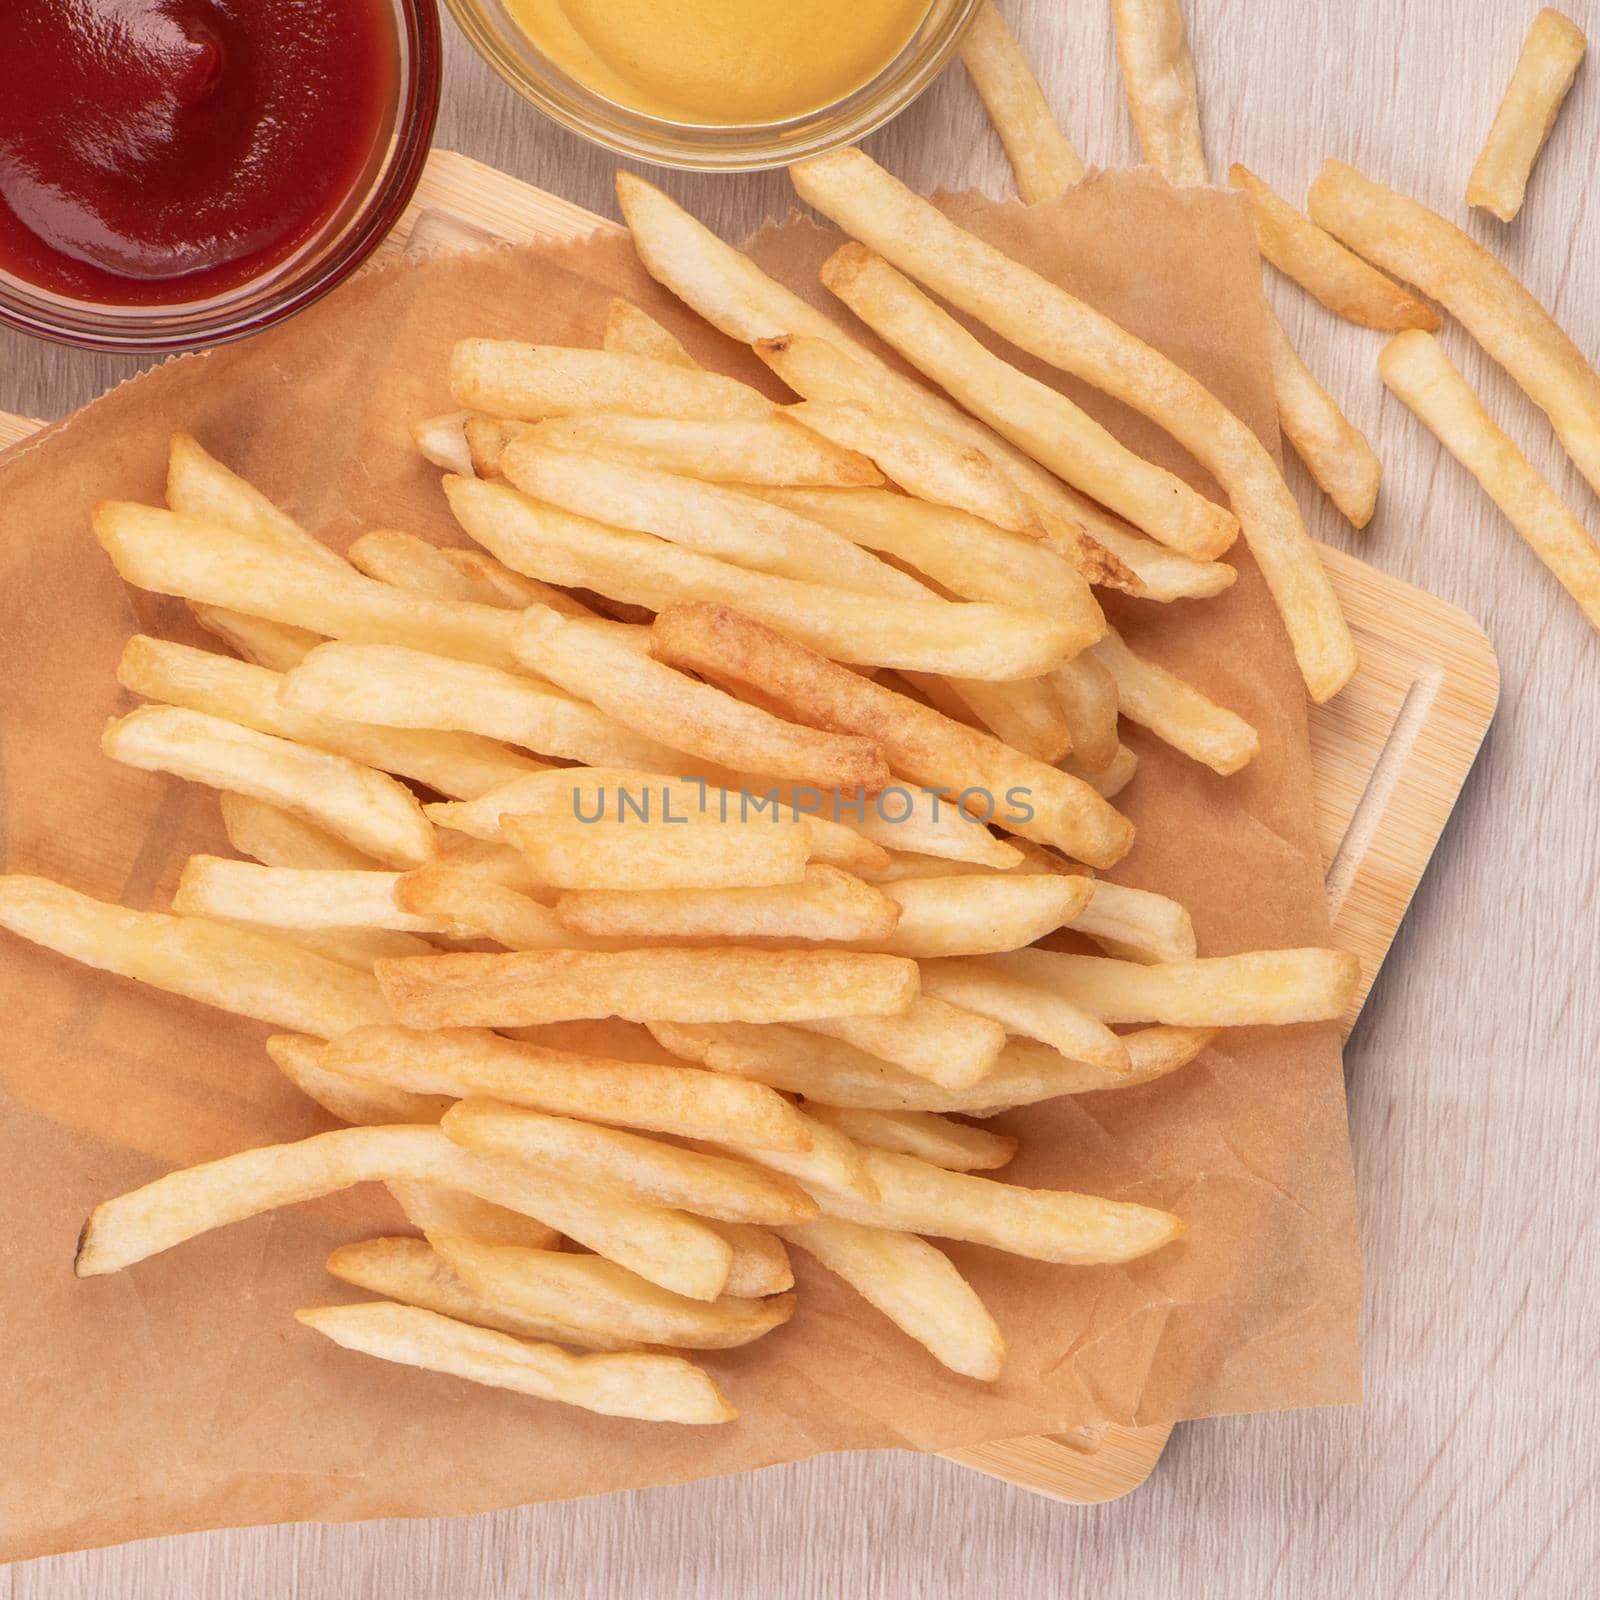 Golden yummy deep French fries on kraft baking sheet paper and serving tray to eat with ketchup and yellow mustard, top view, lifestyle. by ROMIXIMAGE